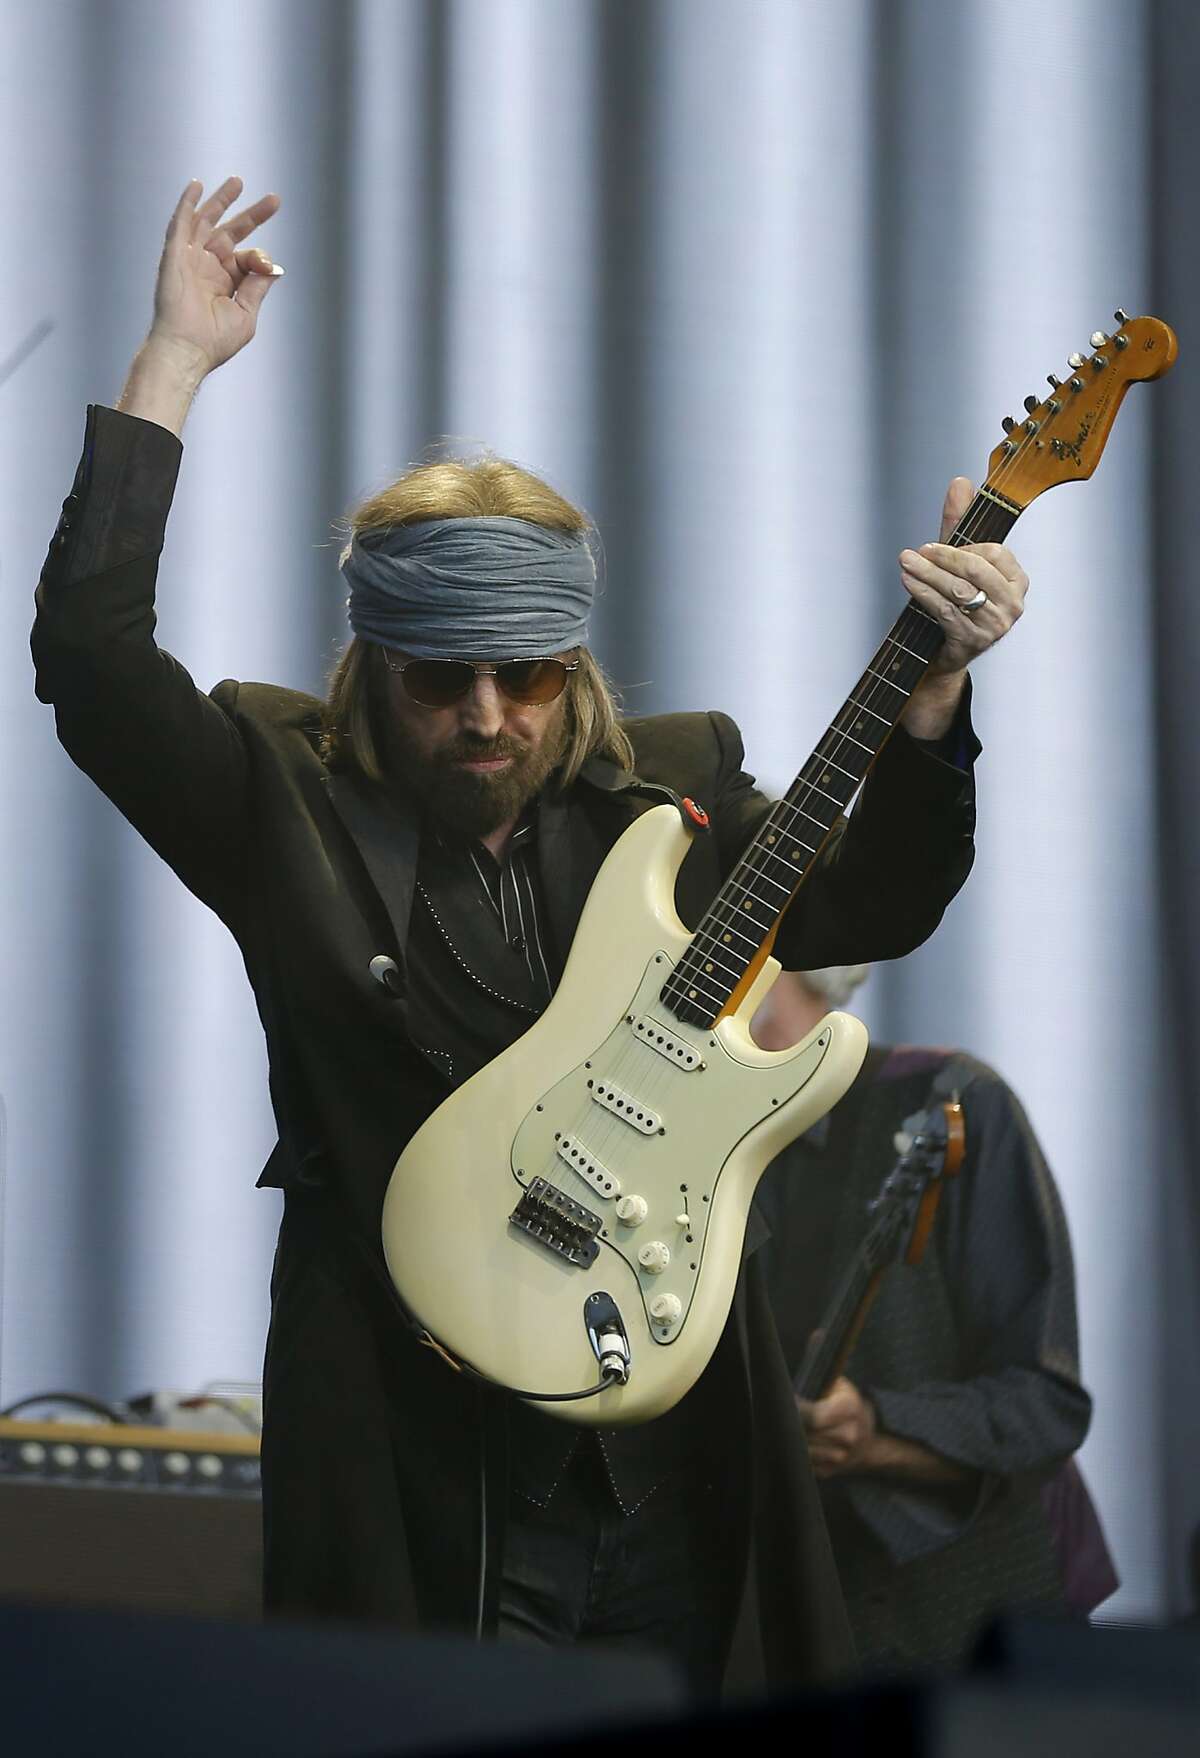 Tom Petty and The Heartbreakers perform at BottleRock on Saturday, May 27, 2017, in Napa, Calif.